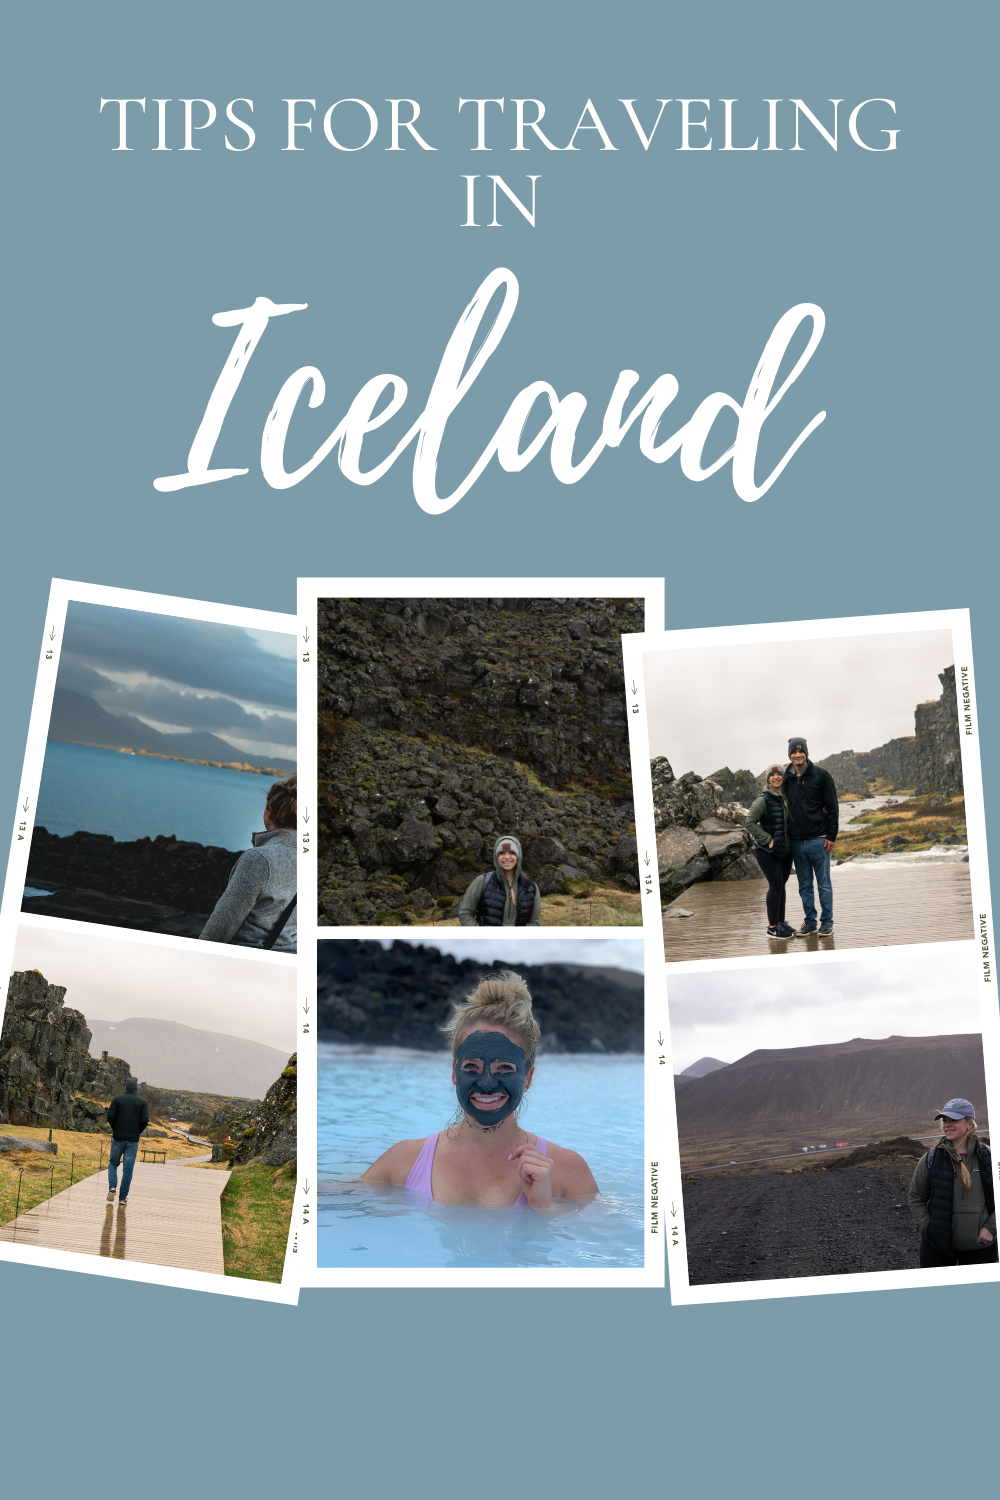 Iceland has been on my bucket list for years so we finally booked the flights for my husband's 30th birthday. We had so much fun on our trip to Iceland and I would do it again in a heartbeat. There are some things that I learned and would change/bring on our next trip because we fully plan on going back! I have put together a list of tips for traveling in Iceland.